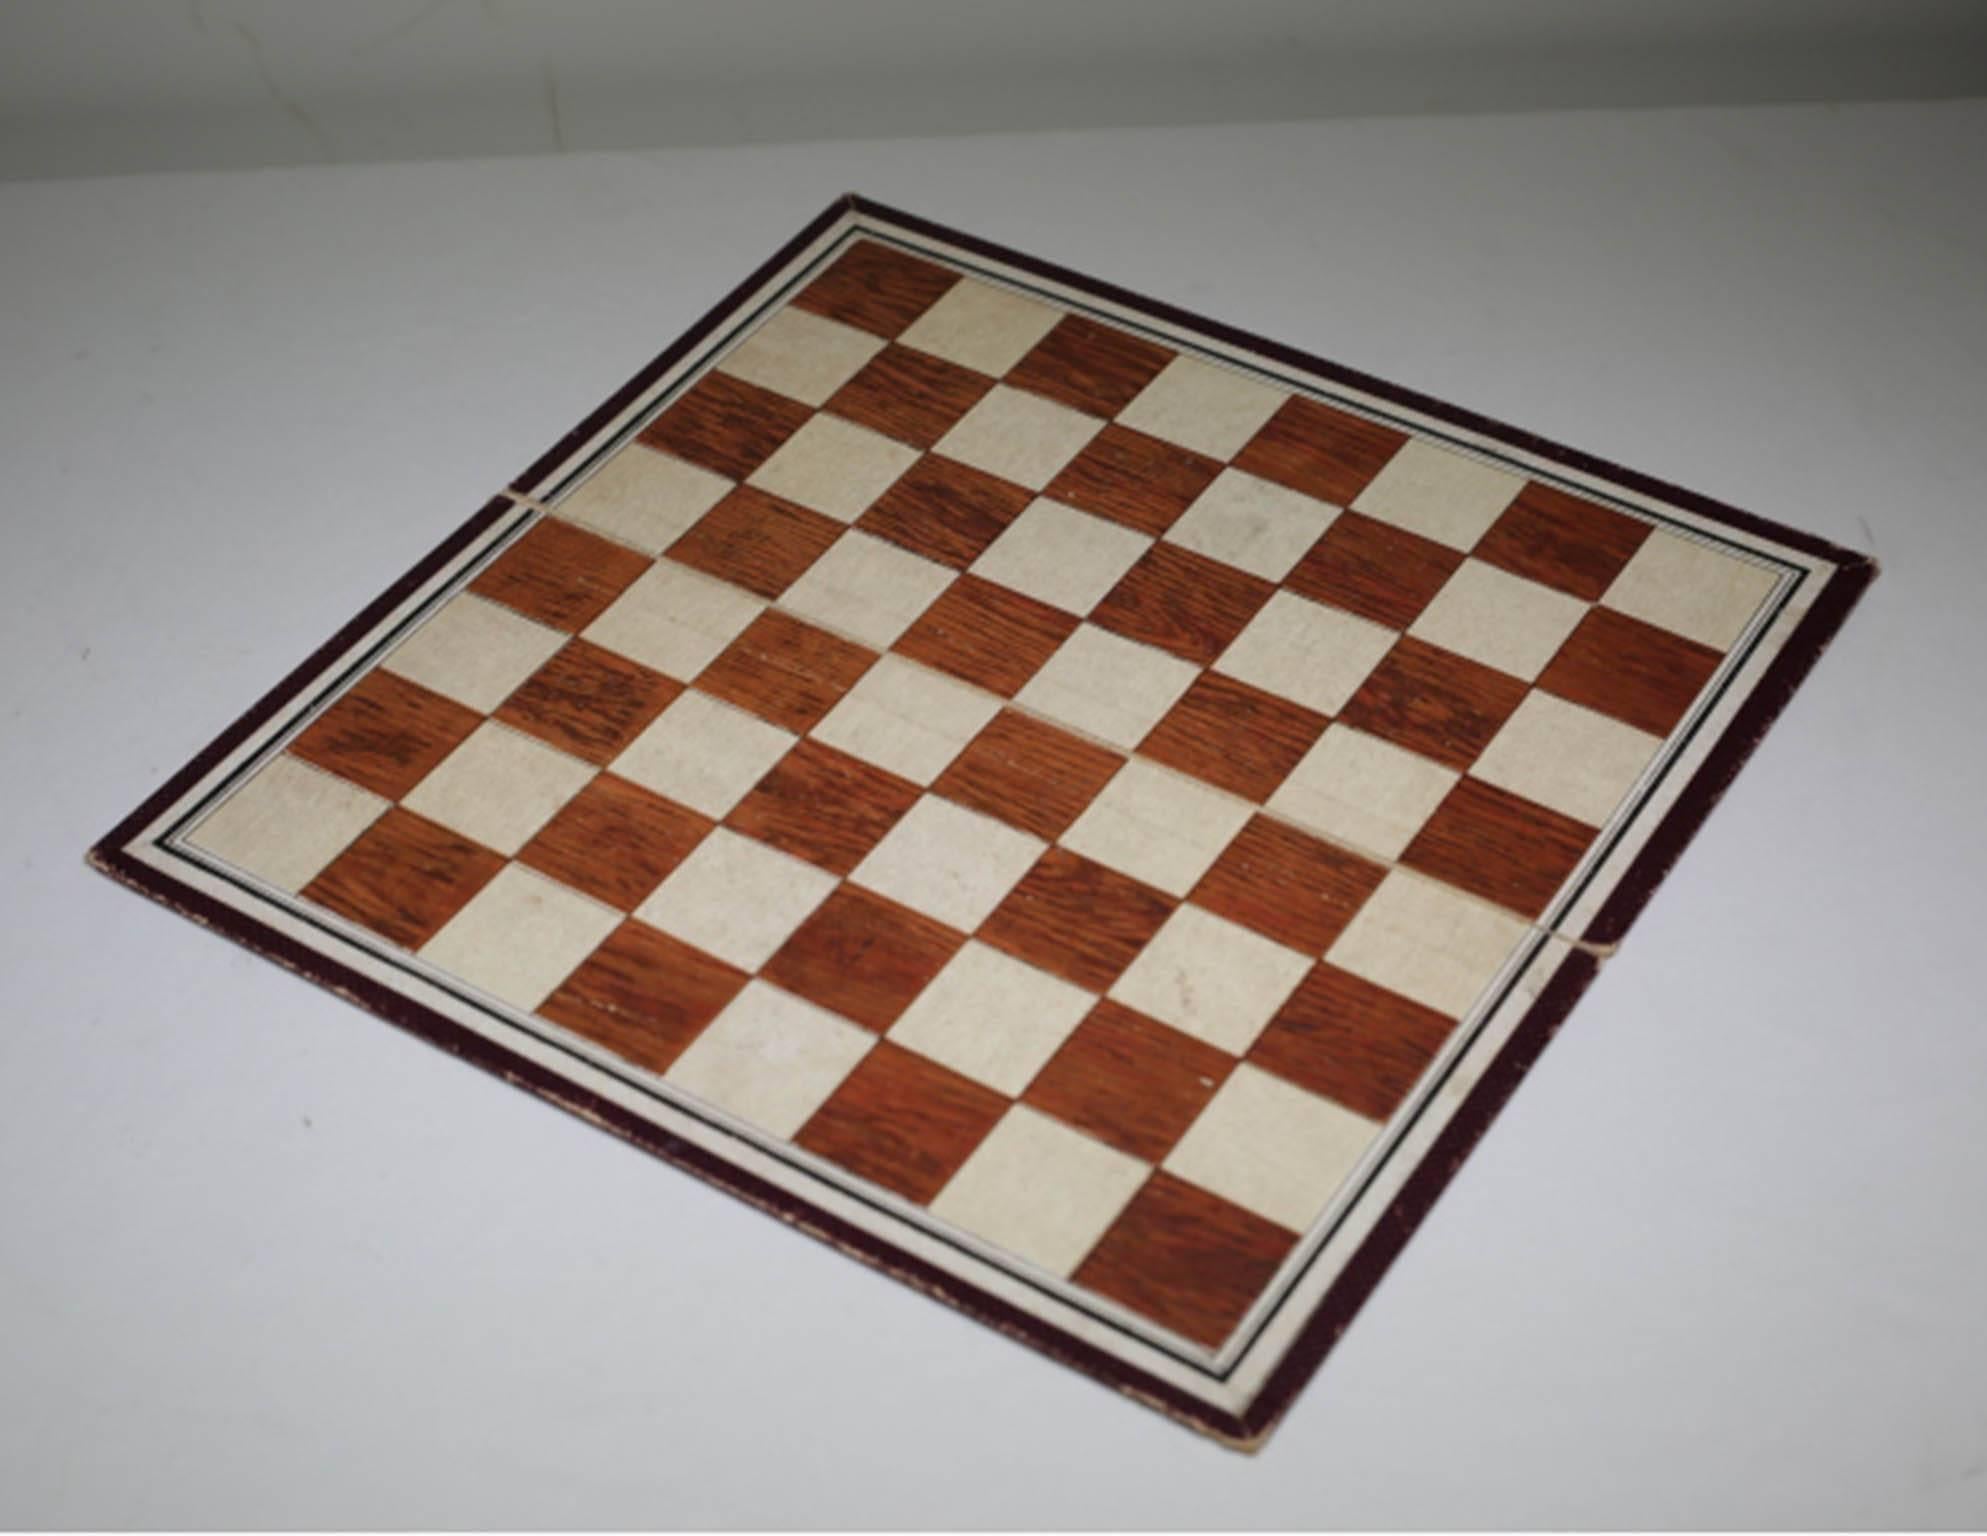 Turn of the Century Game Box 'Chess, Checkers, Asalto, Lotto and Dominos' 1